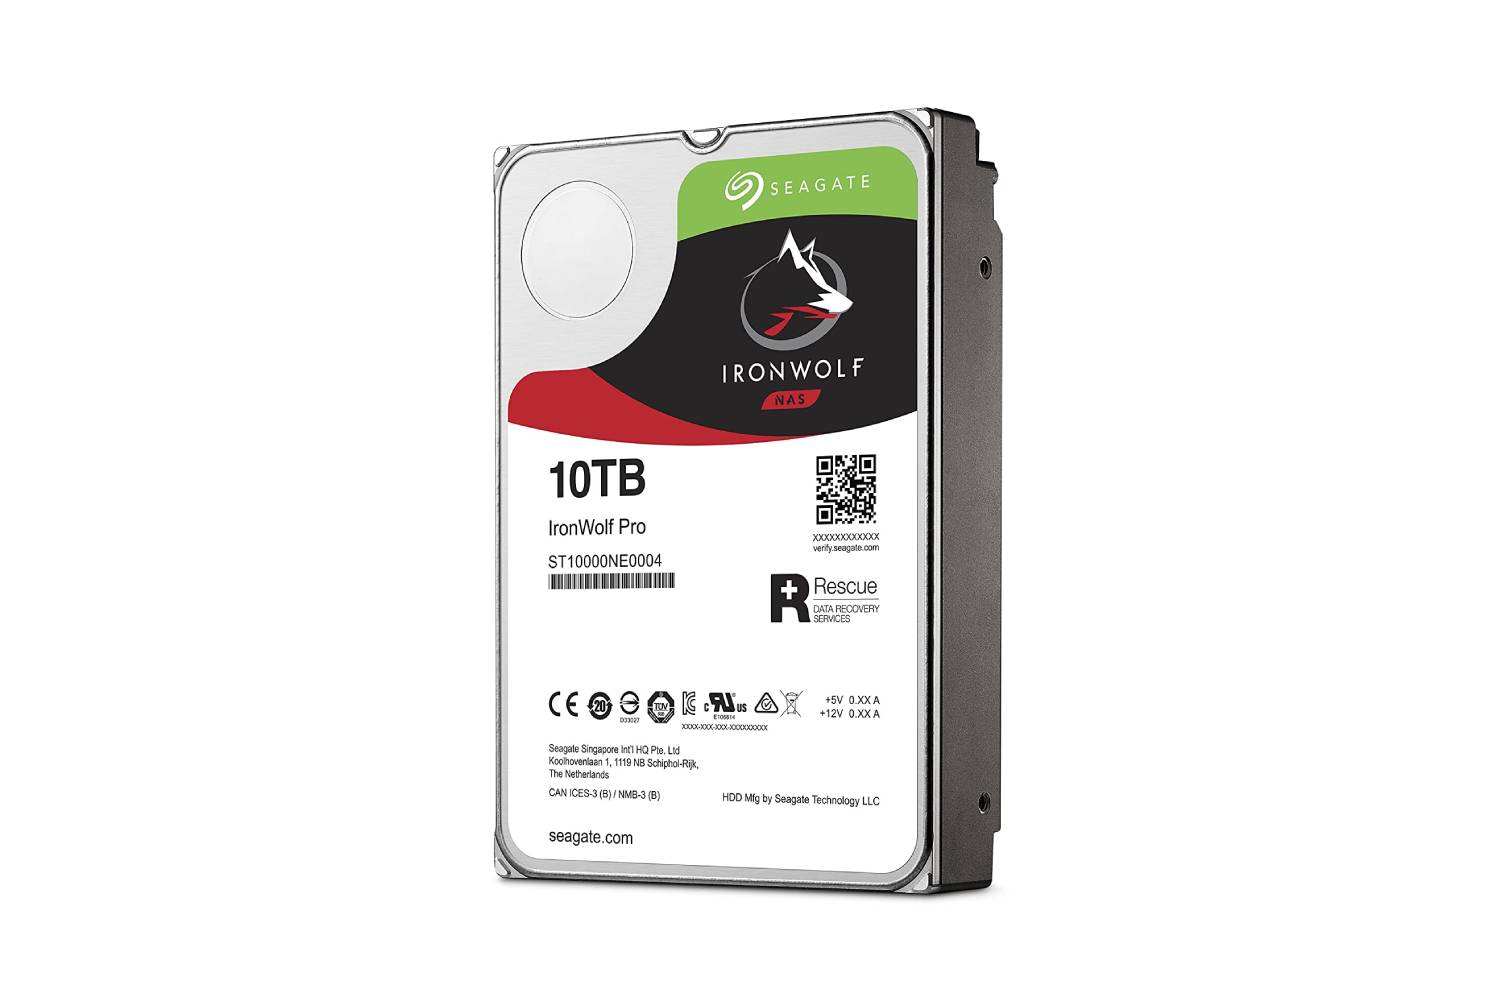 Seagate 10TB IronWolf Pro 7200RPM SATA 6Gb/s 256MB Cache 3.5-Inch NAS HDD